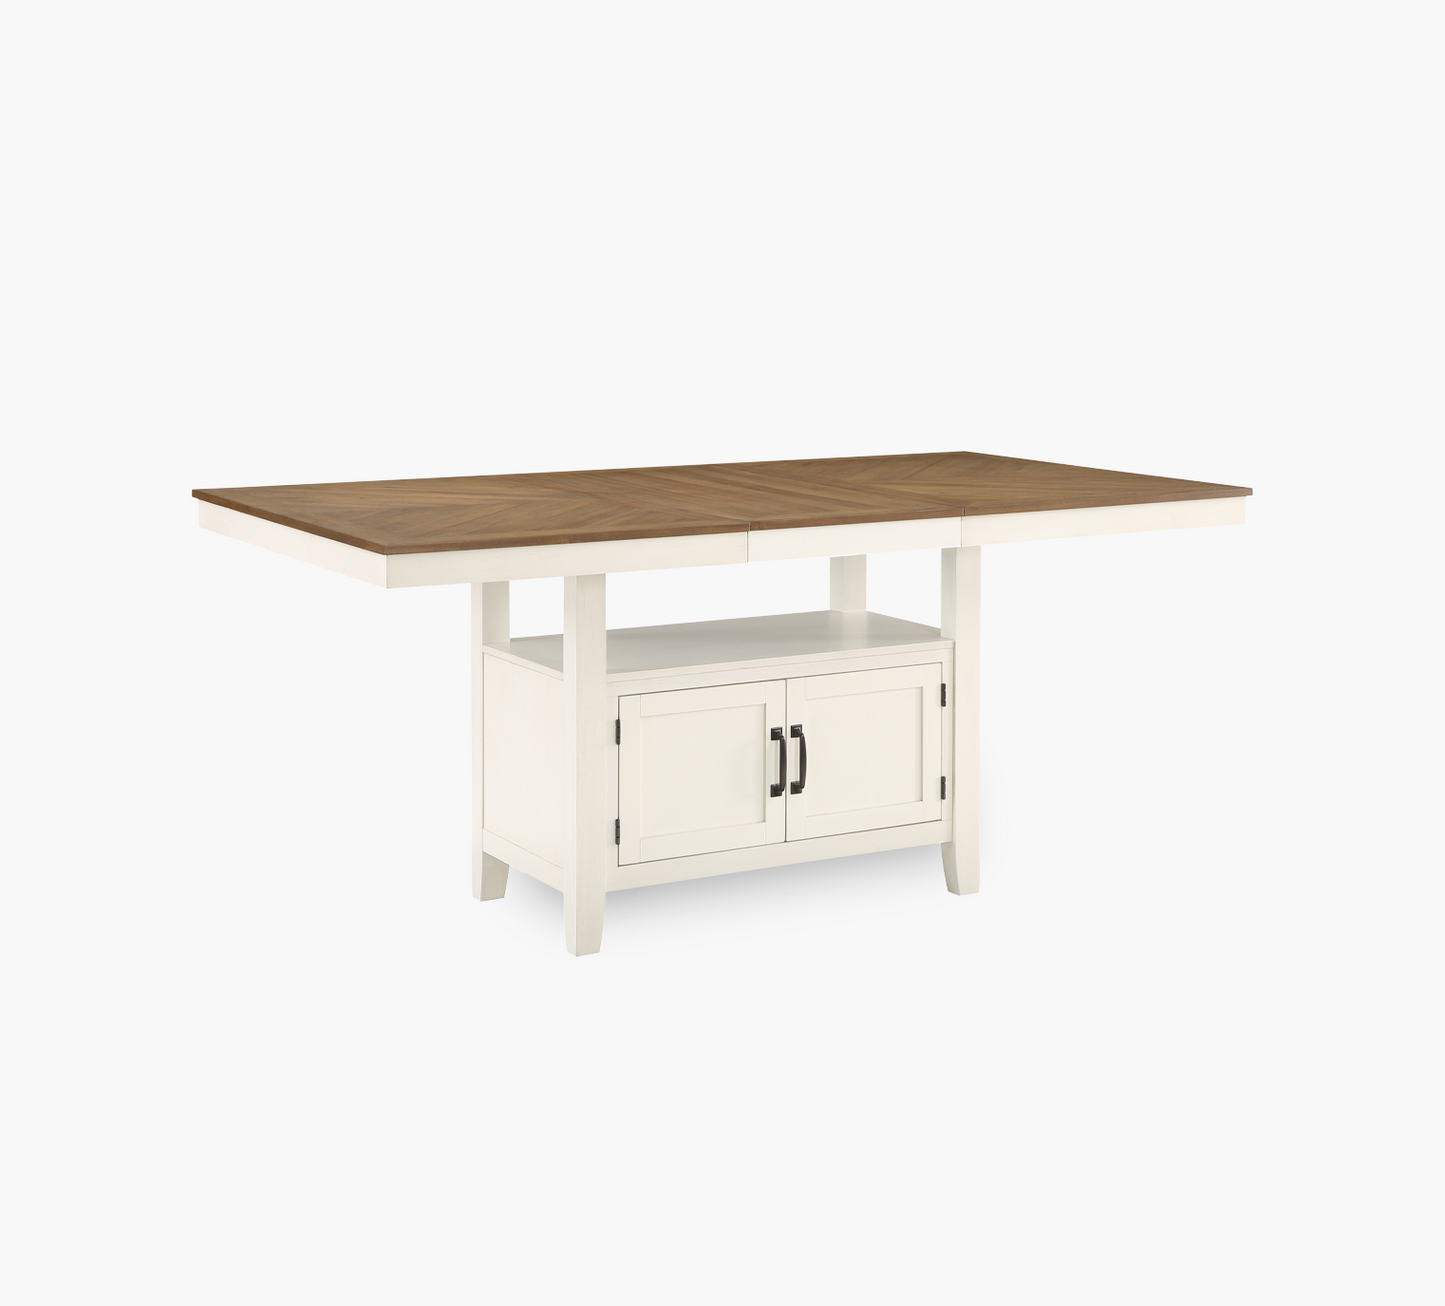 Hyland Pub Counter Height Table